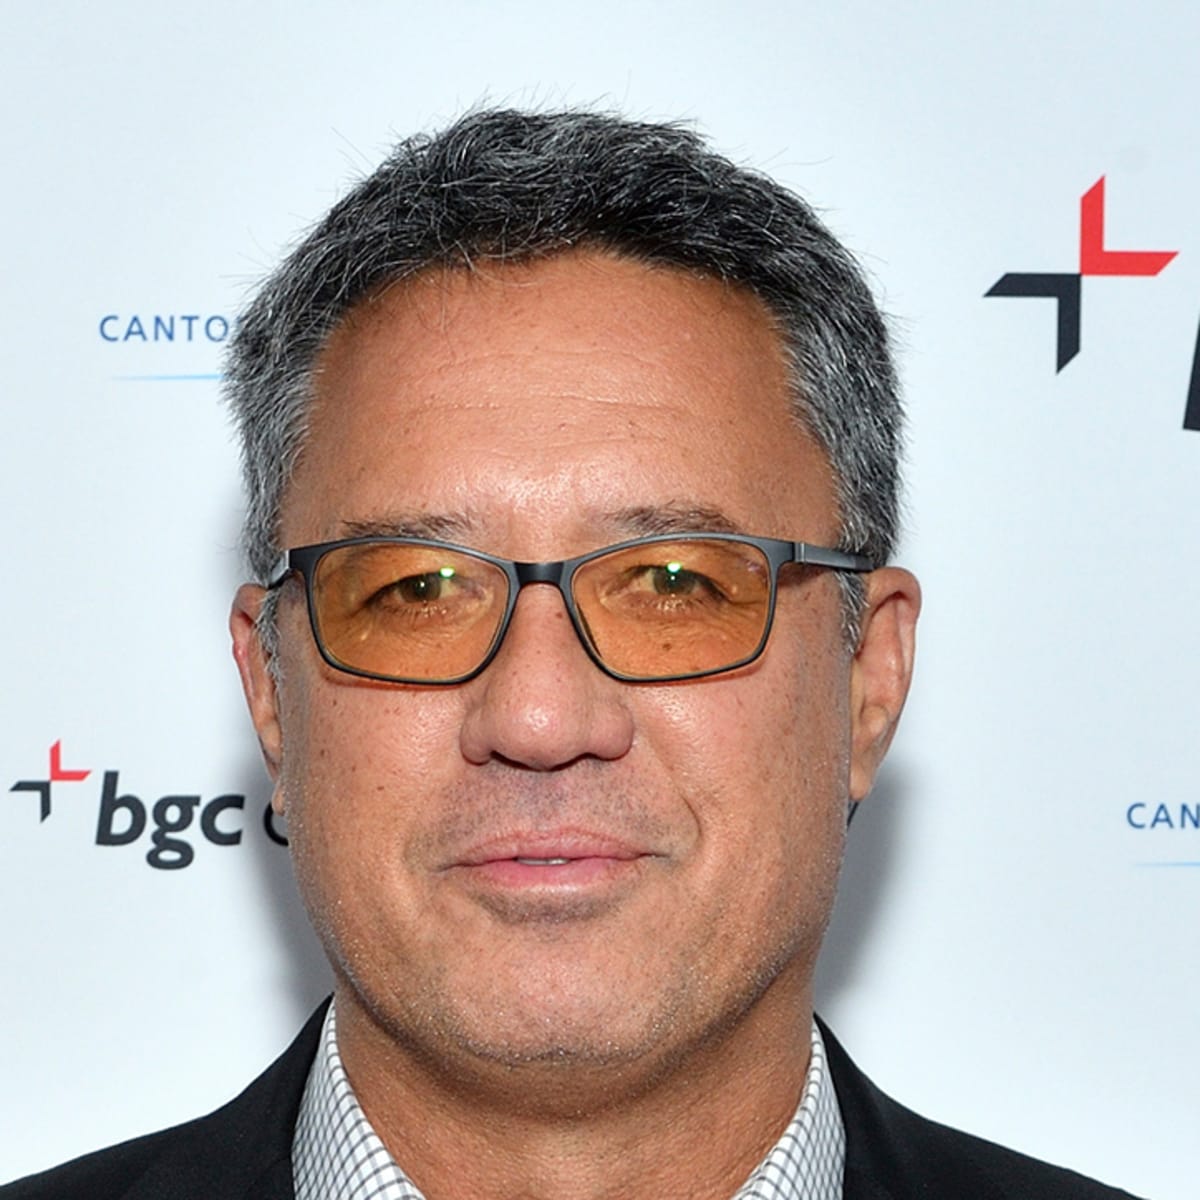 Ron Darling to undergo surgery, take leave of absence from SNY - Sports  Illustrated